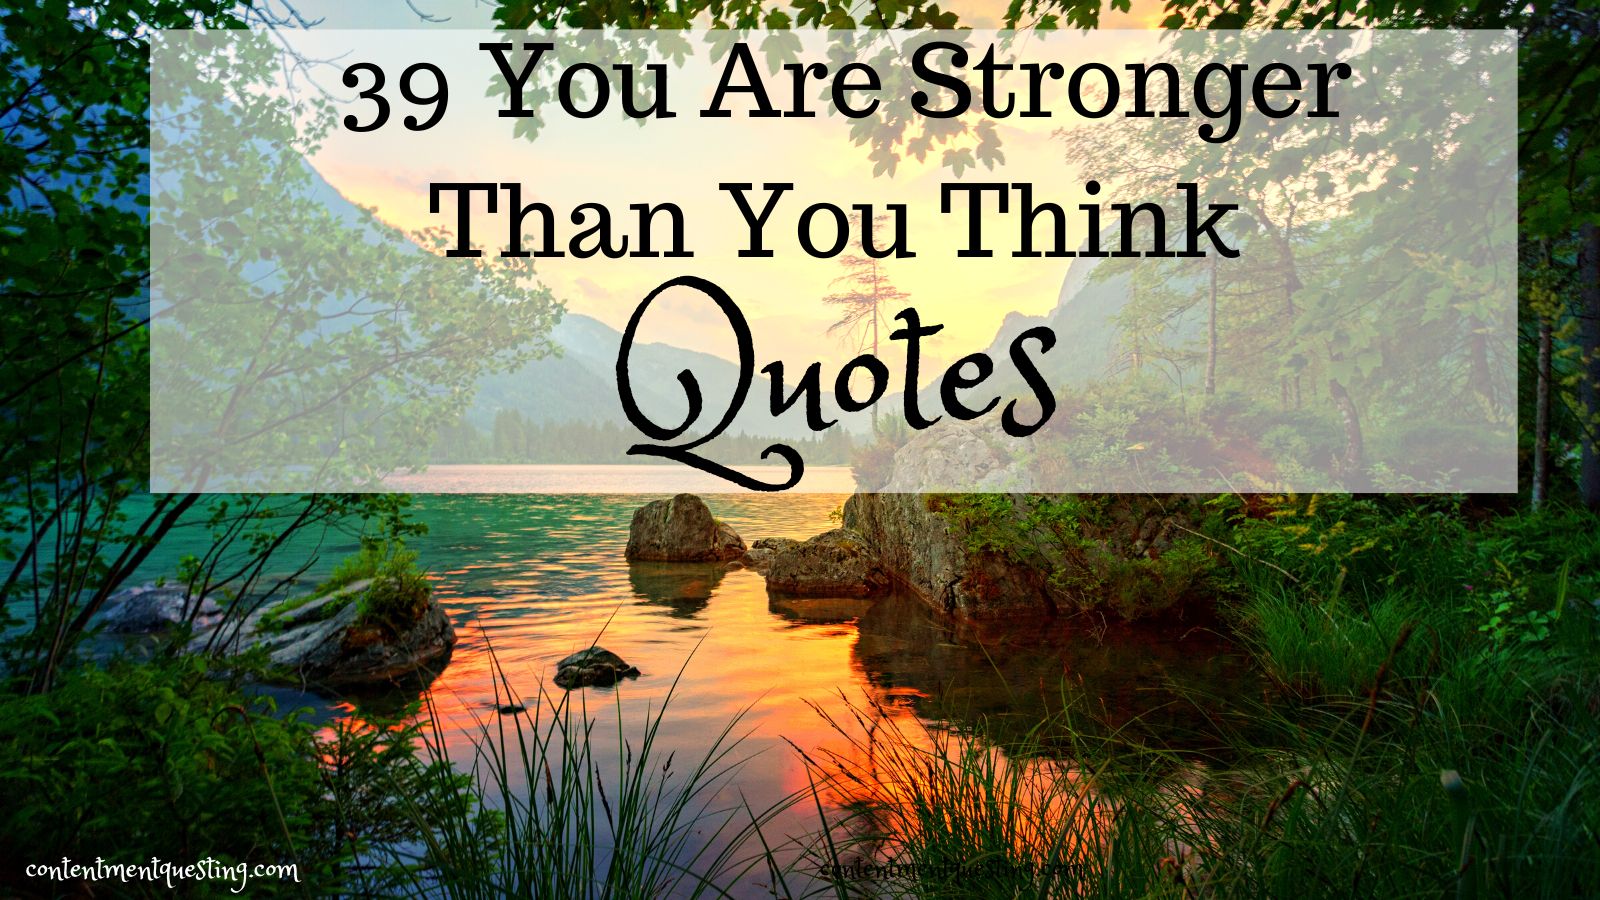 39 You Are Stronger Than You Think Quotes - Contentment Questing